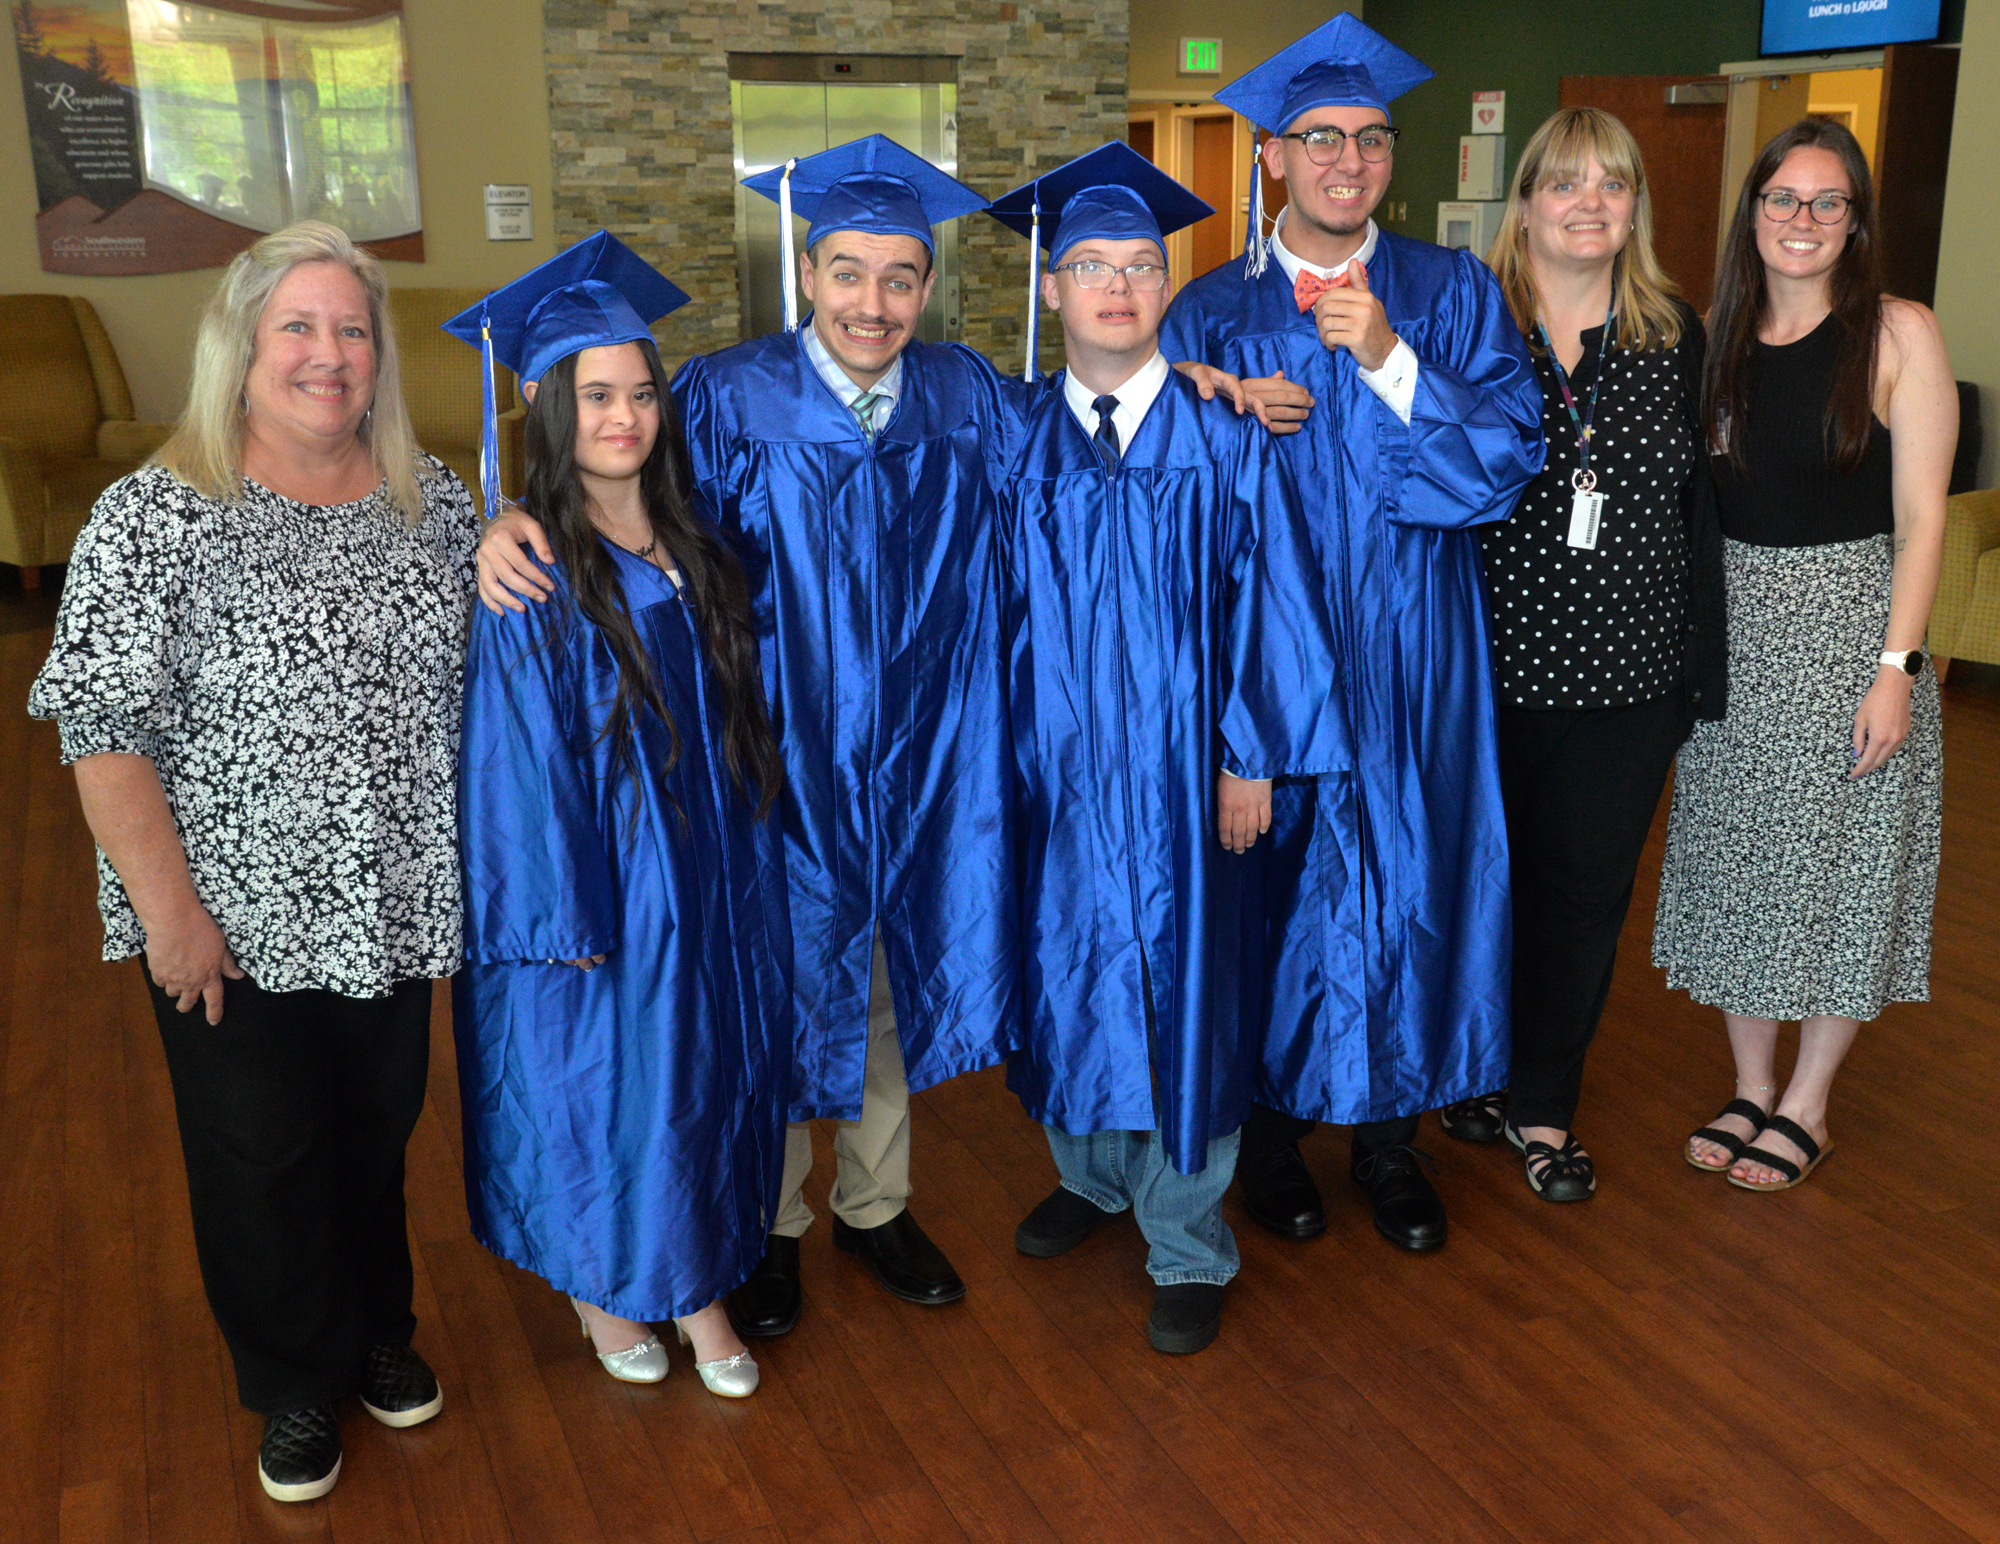 Project SEARCH graduates are pictured here with their instructors at Southwestern Community College, from left: Devonne Jimison, SCC’s Director of College & Career Readiness; Hope Lafleur of Waynesville; Johnathon Collier of Franklin; Josiah Bjerkness of Bryson City; Kody Kirkland of Sylva; Laura Tooker, SCC’s Coordinator of High School Equivalency Testing; and Alexa Lockhart, Project SEARCH Skills Trainer.